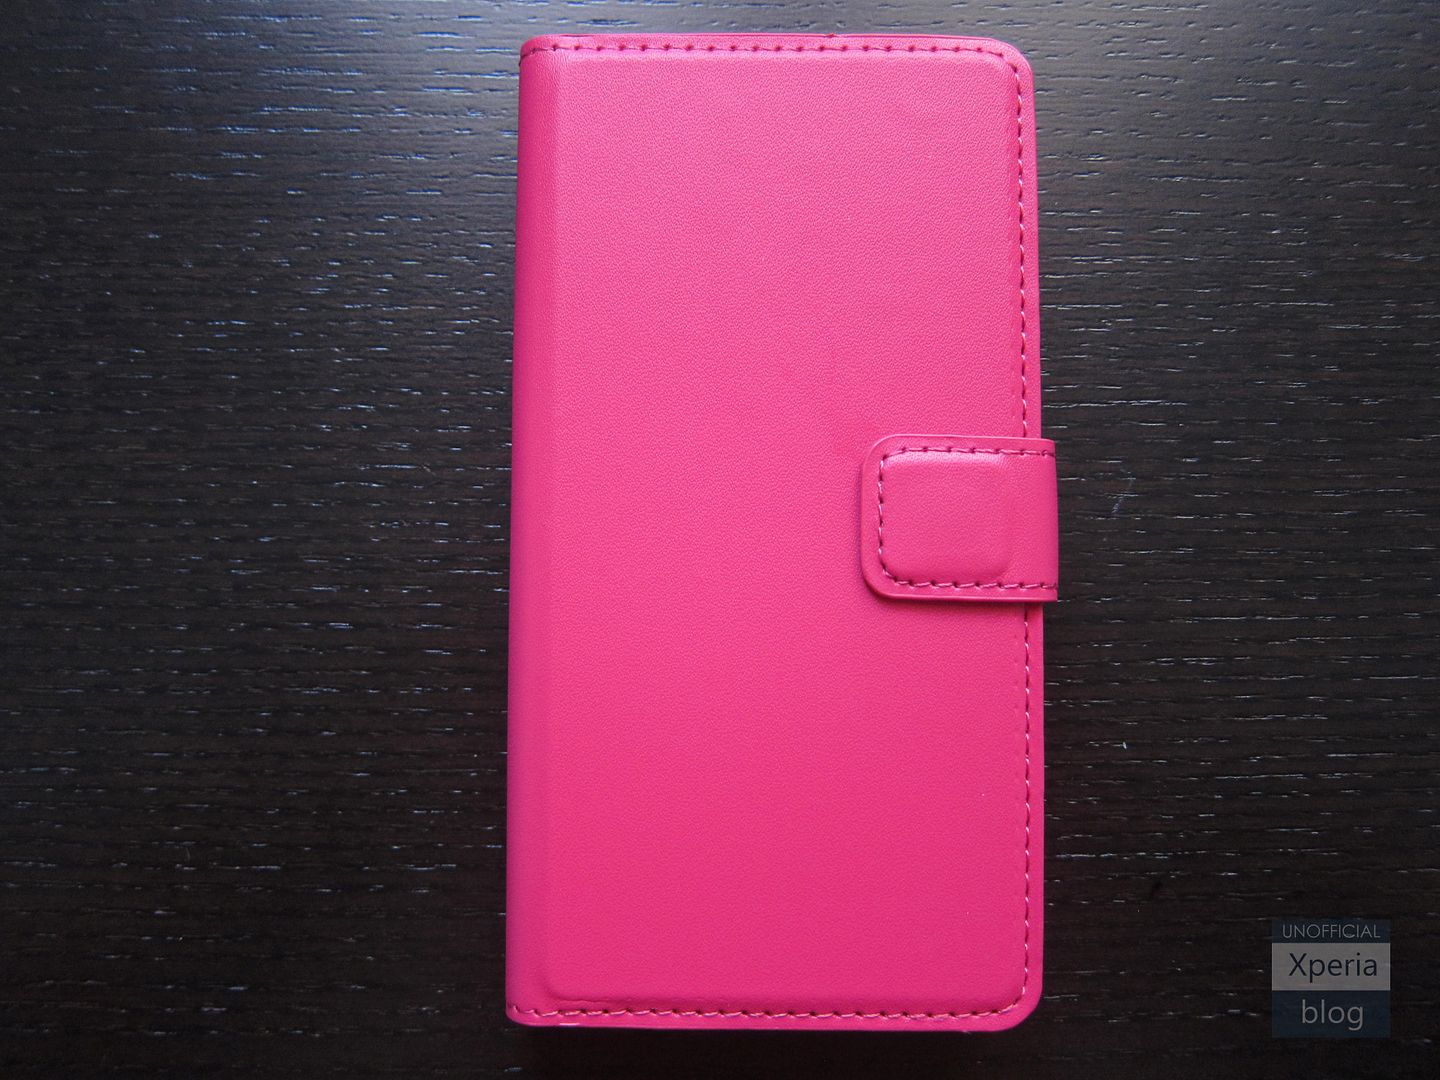 Muvit Wallet Folio for Xperia Z3 Compact Review